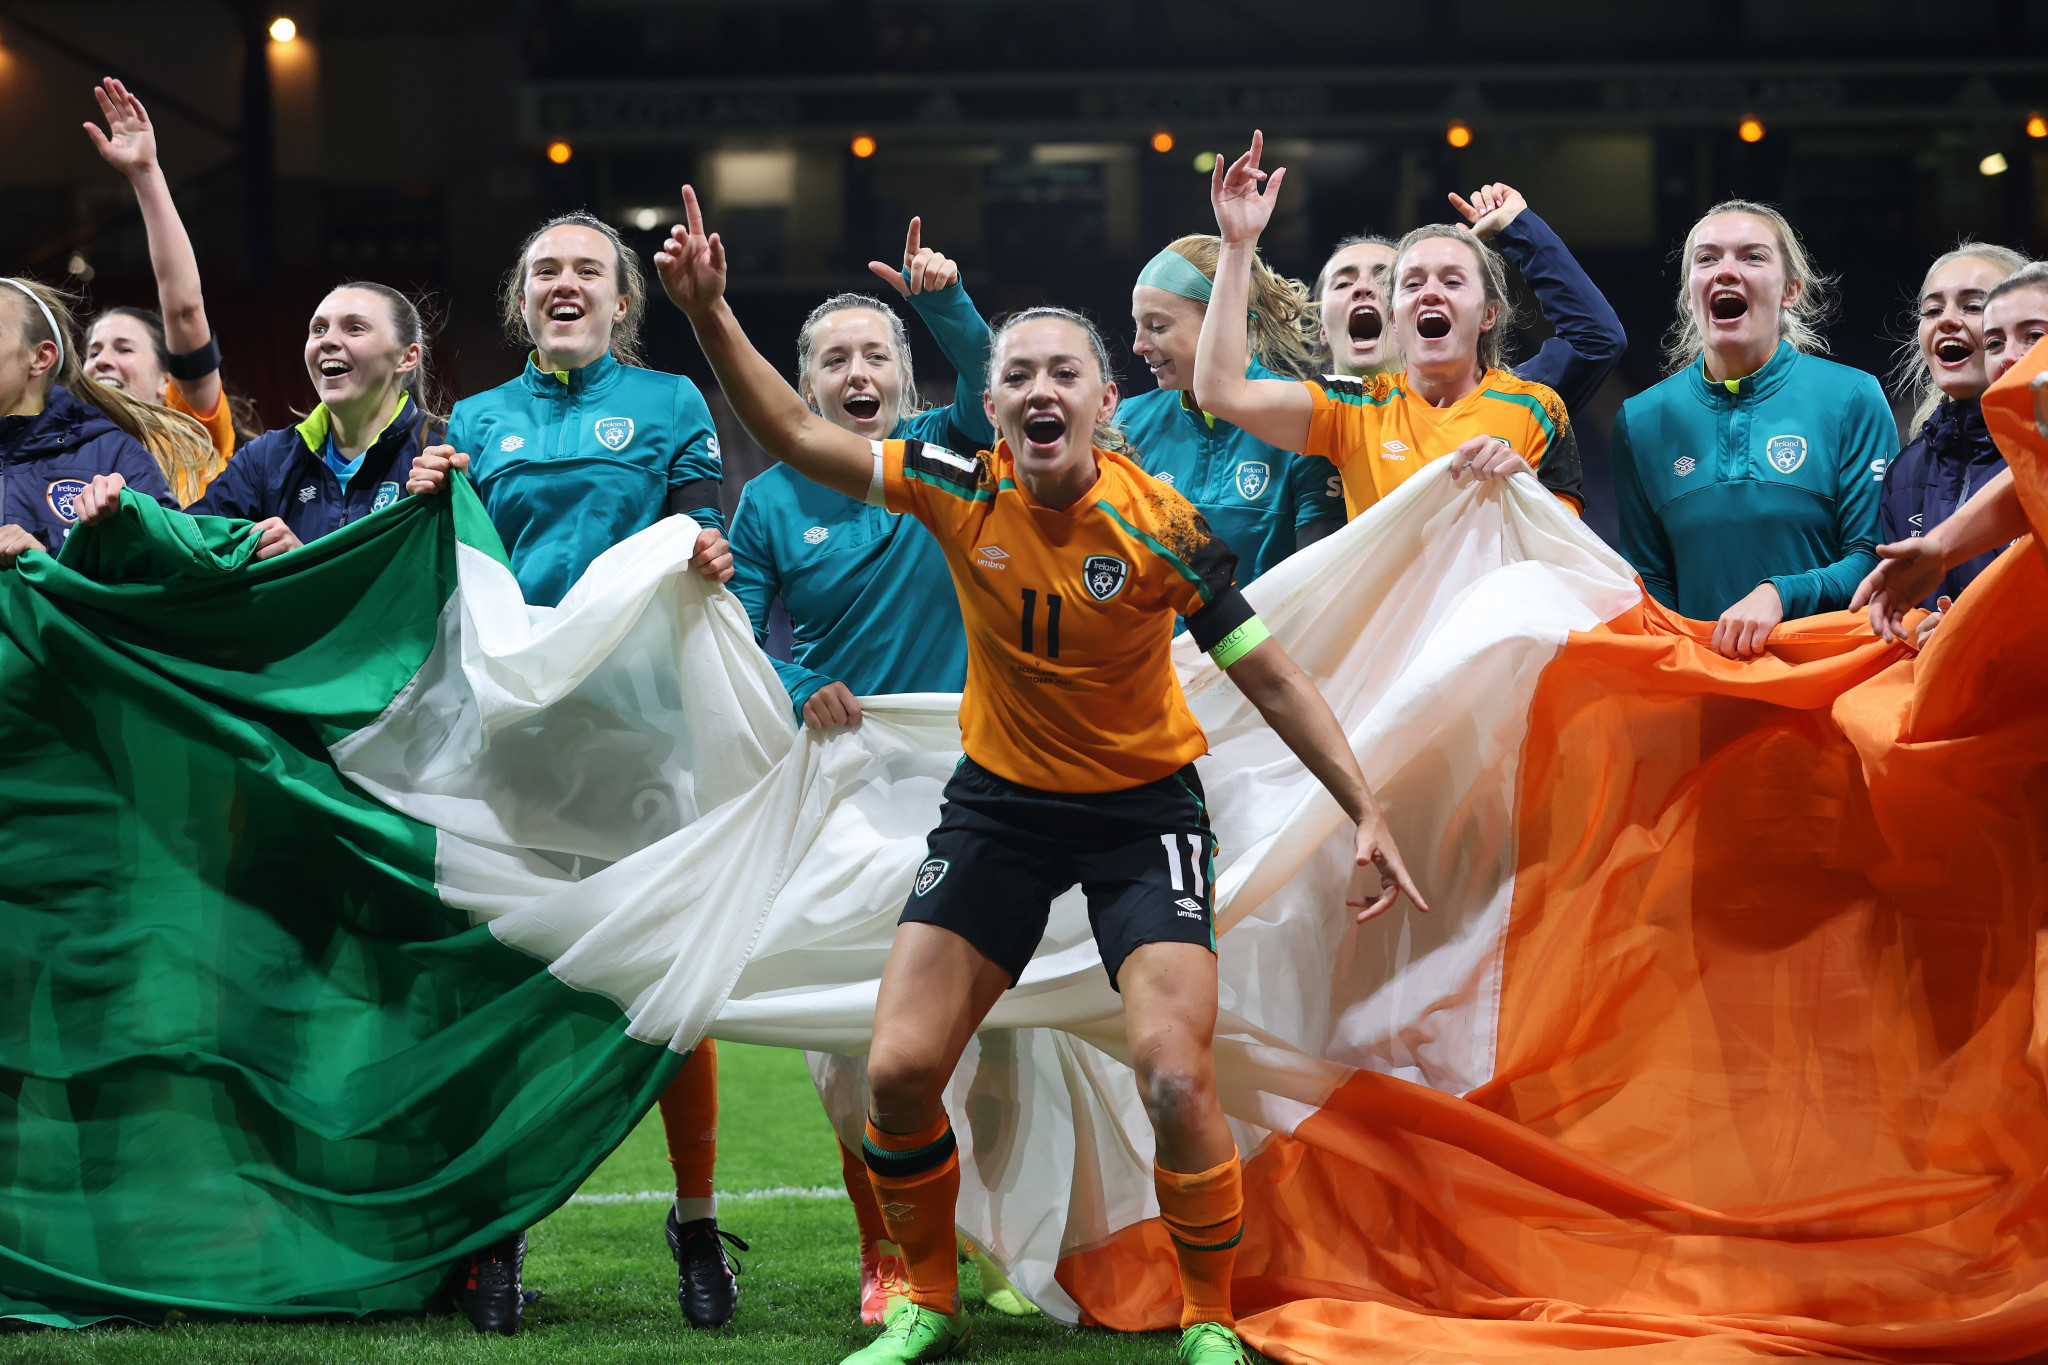 Ireland beat Scotland 1-0 to qualify for the FIFA Women's World Cup for the first time ©Getty Images